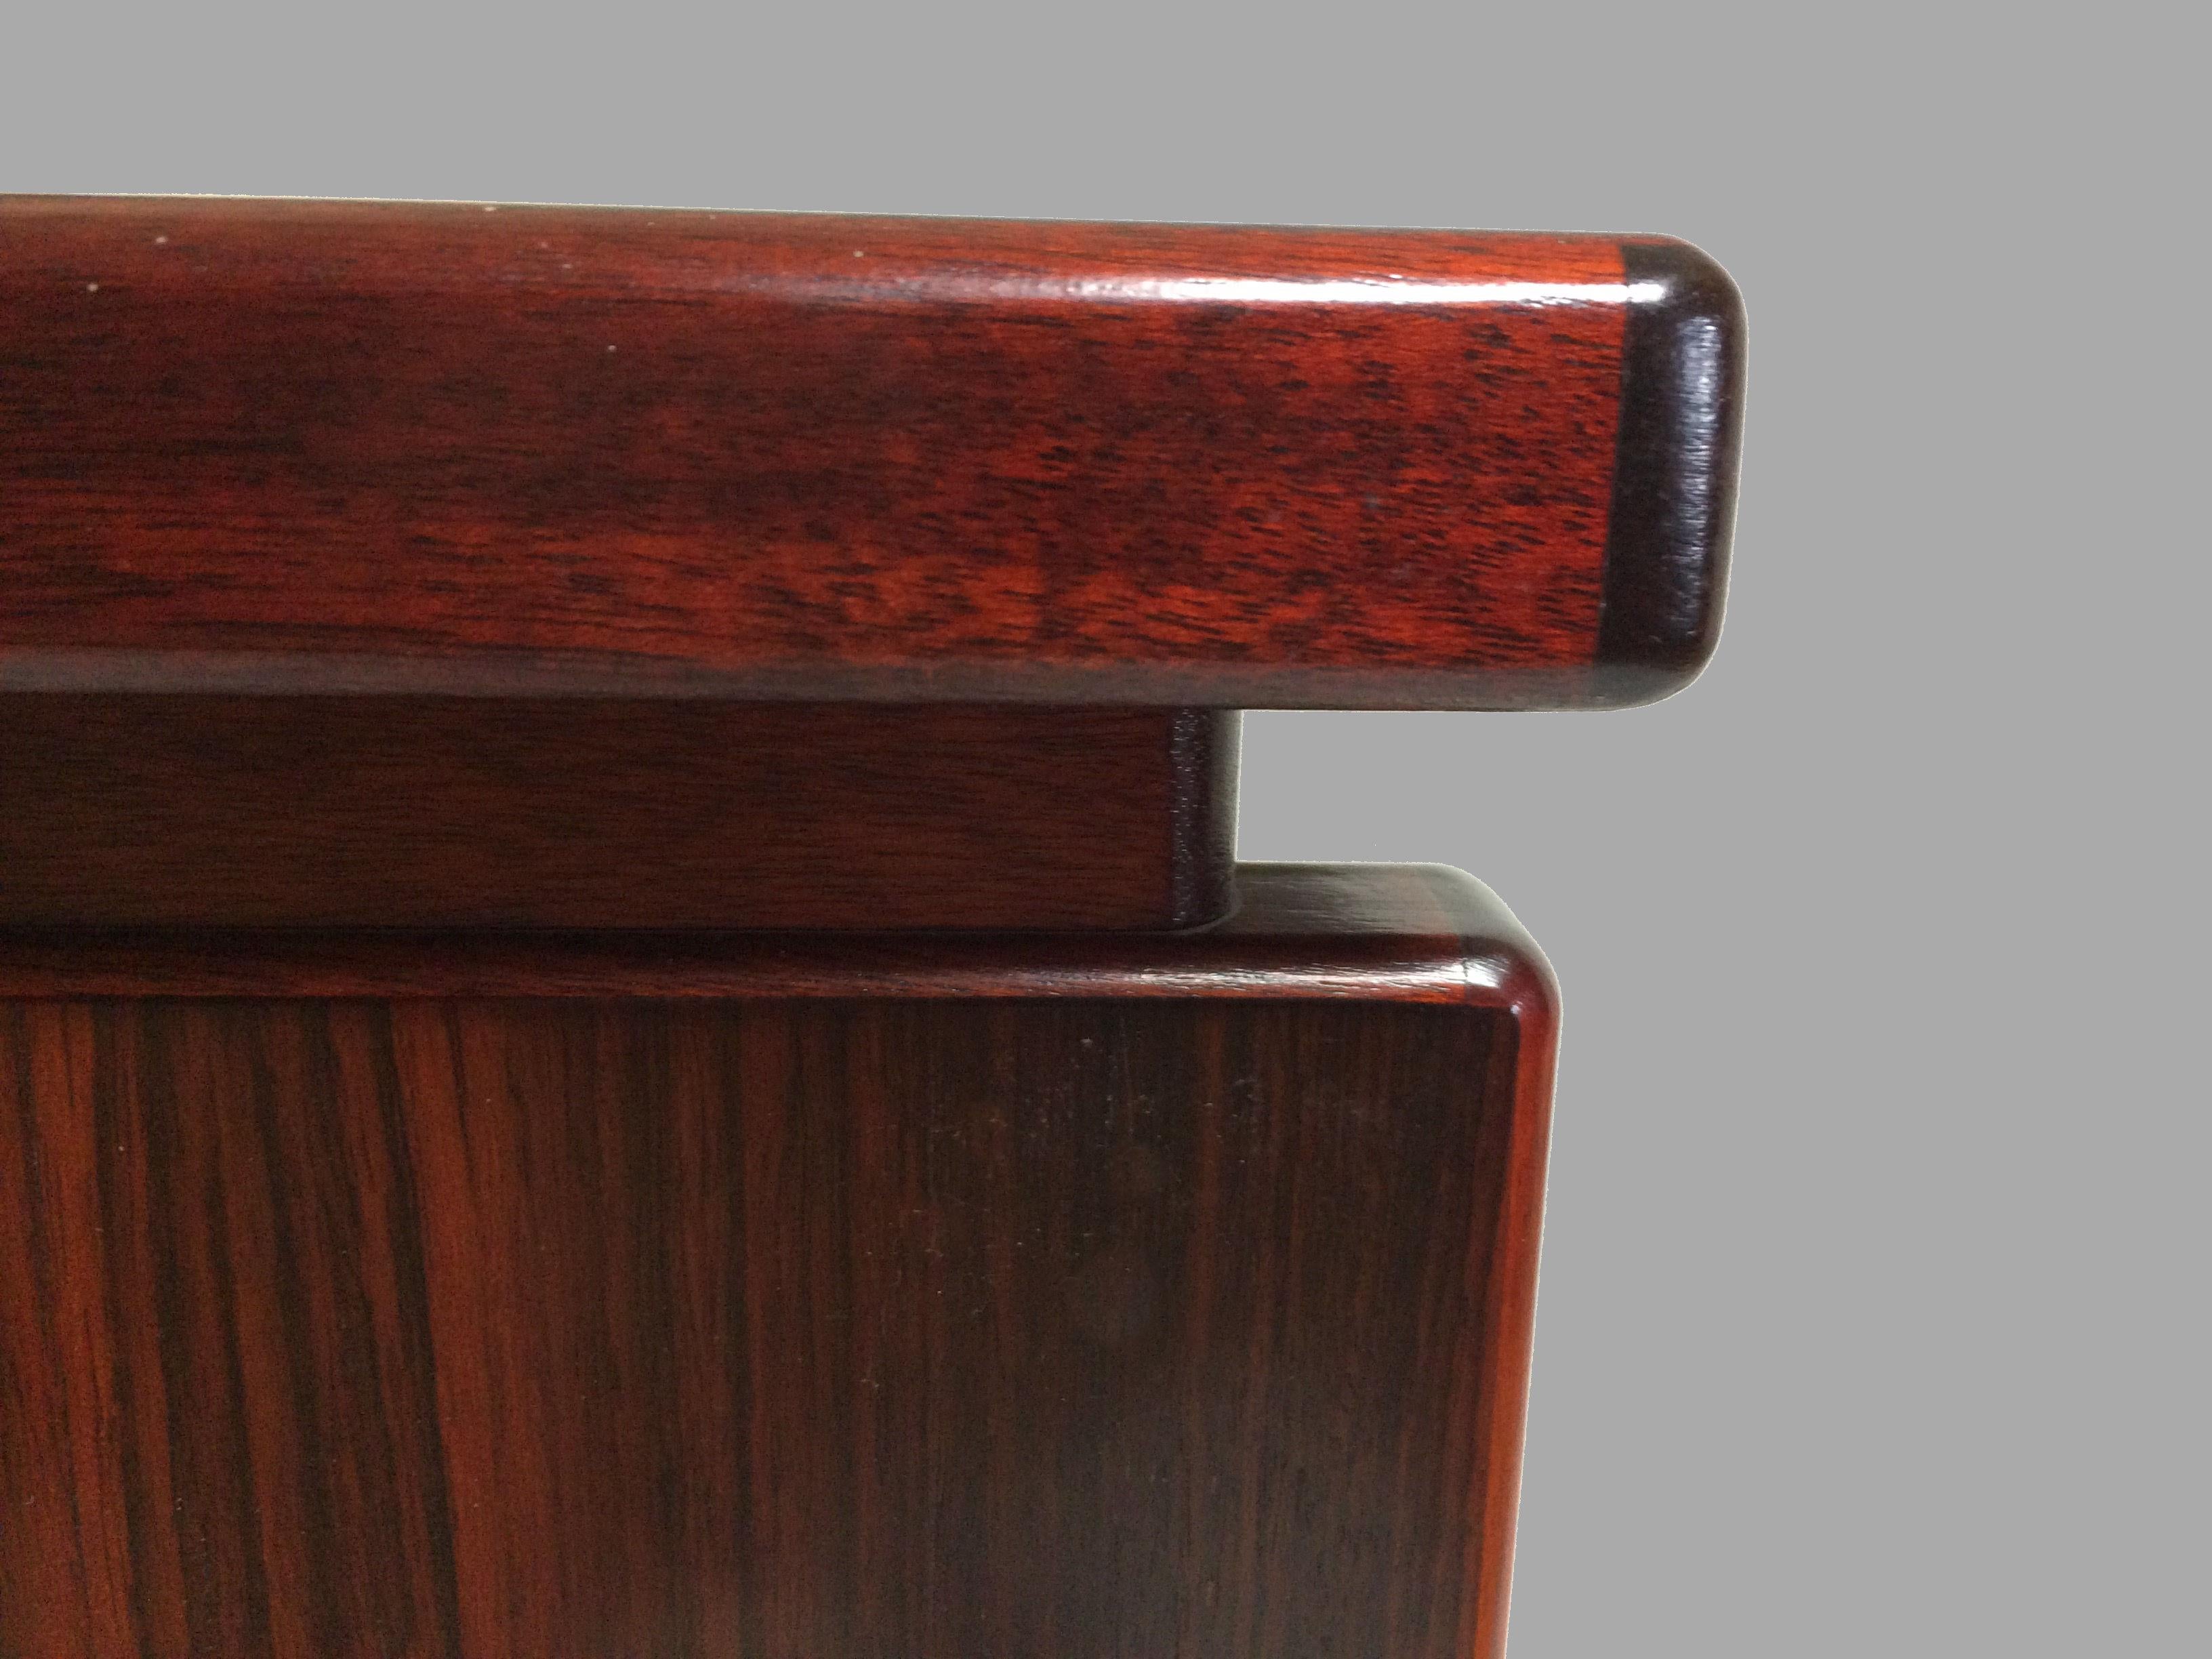 Late 20th Century 1990s Excecutive Desk in Rosewood by Bent Silberg for Bent Silberg Mobler